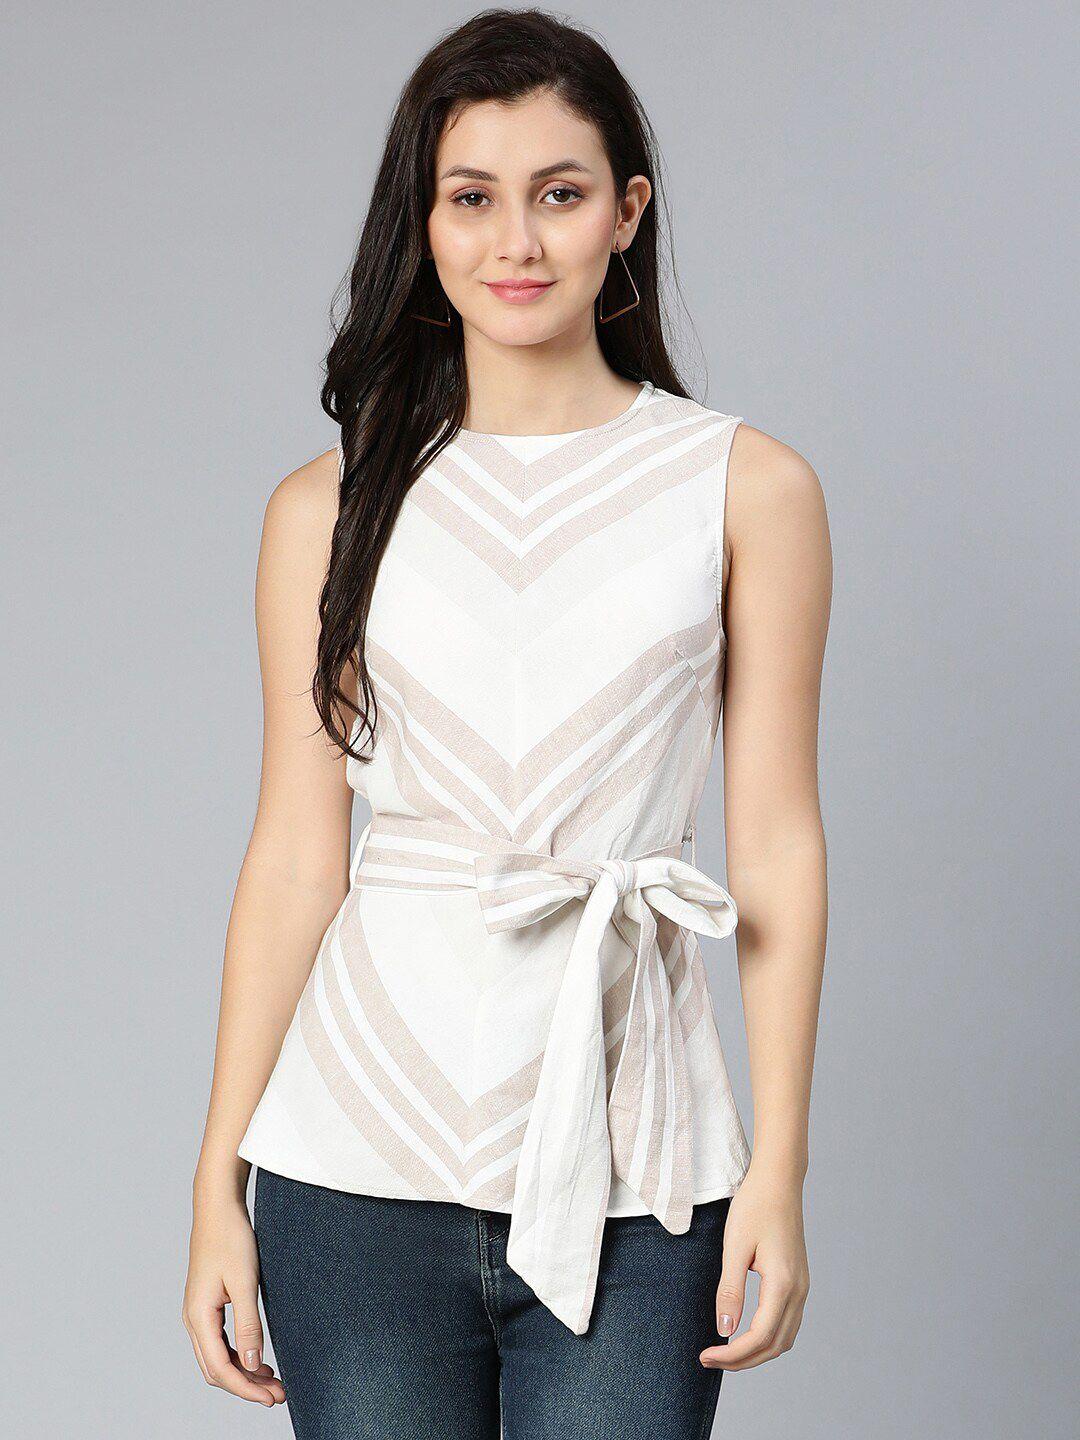 Oxolloxo Women White Pure Cotton Striped Sleeveless Belted Top